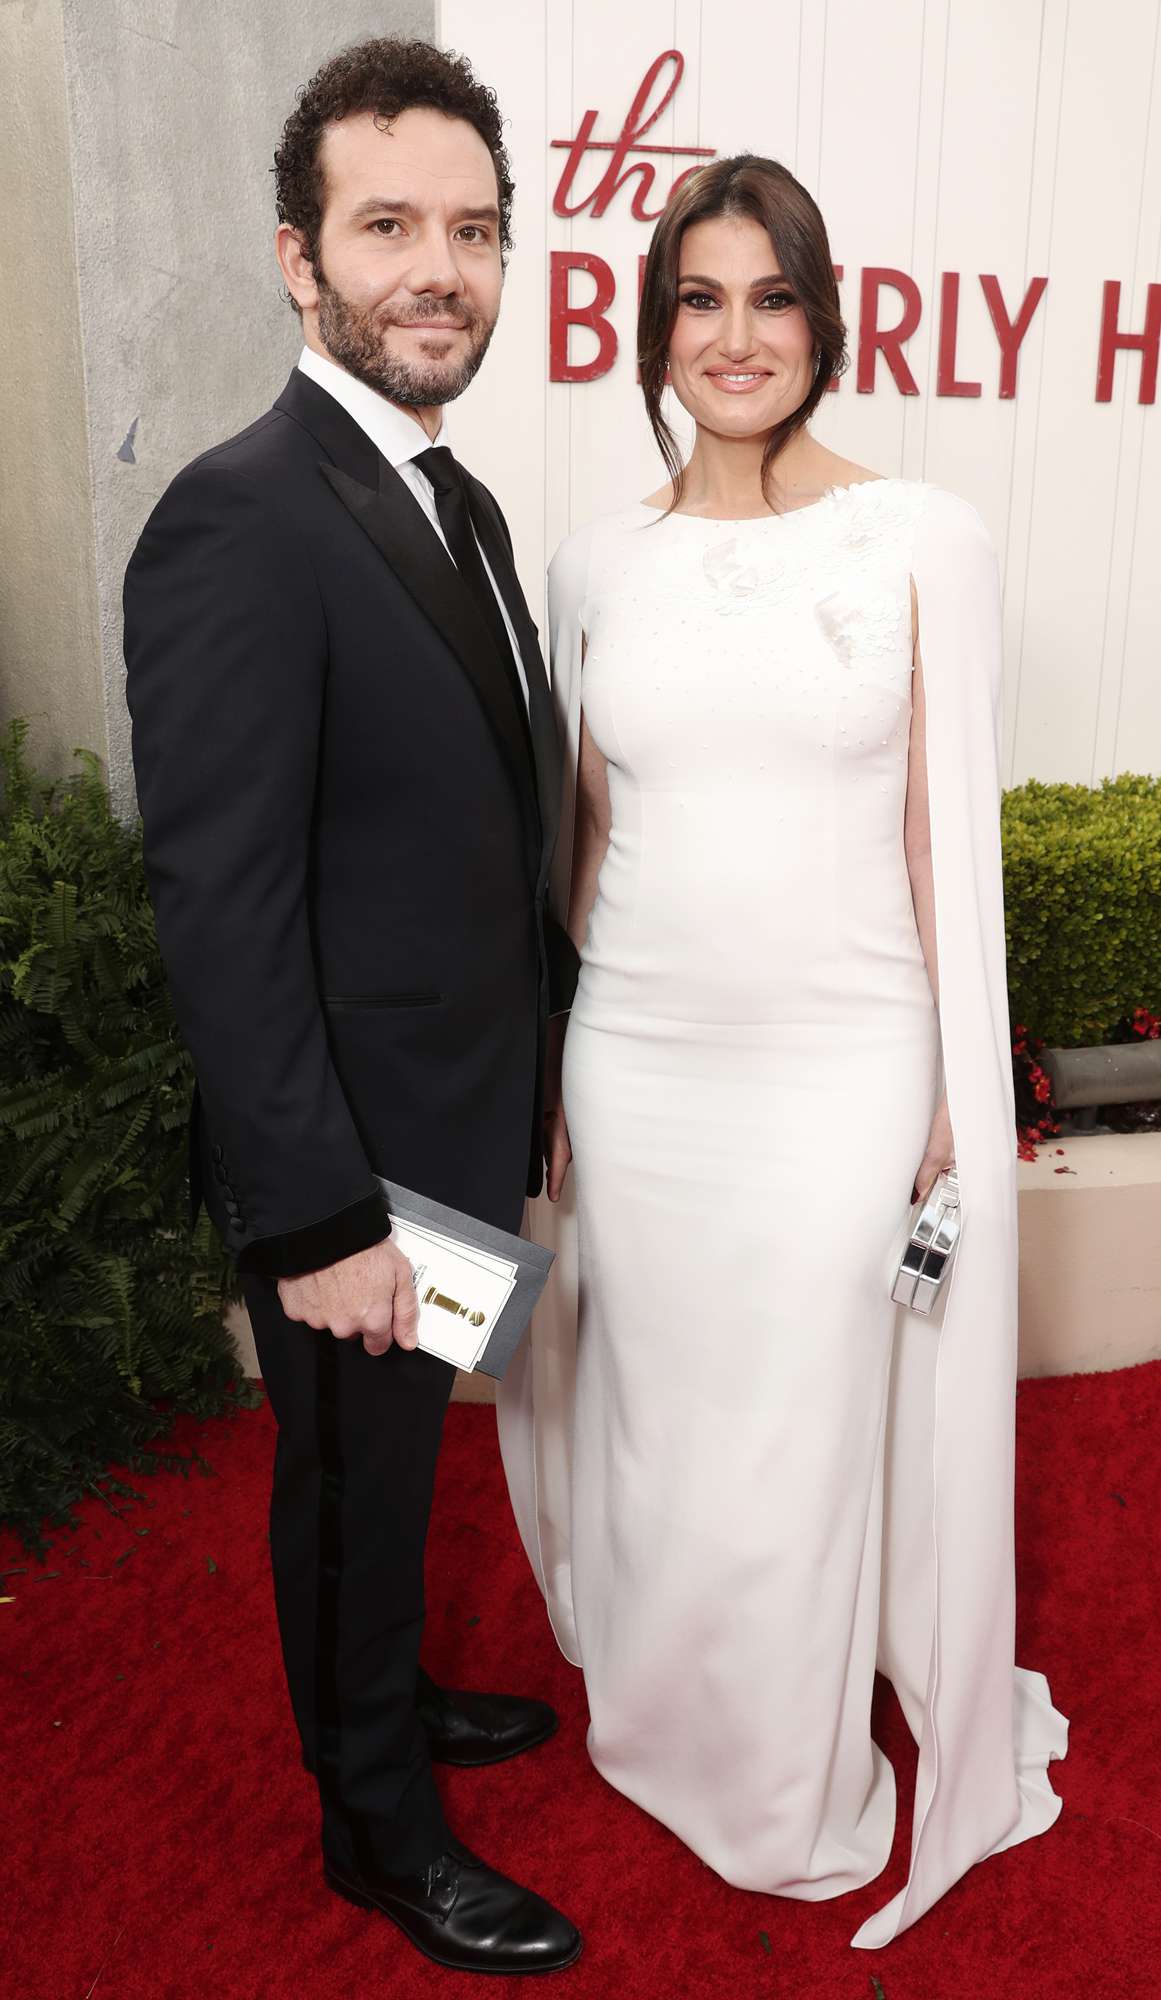 Aaron Lohr and Idina Menzel arrive to the 77th Annual Golden Globe Awards held at the Beverly Hilton Hotel on January 5, 2020